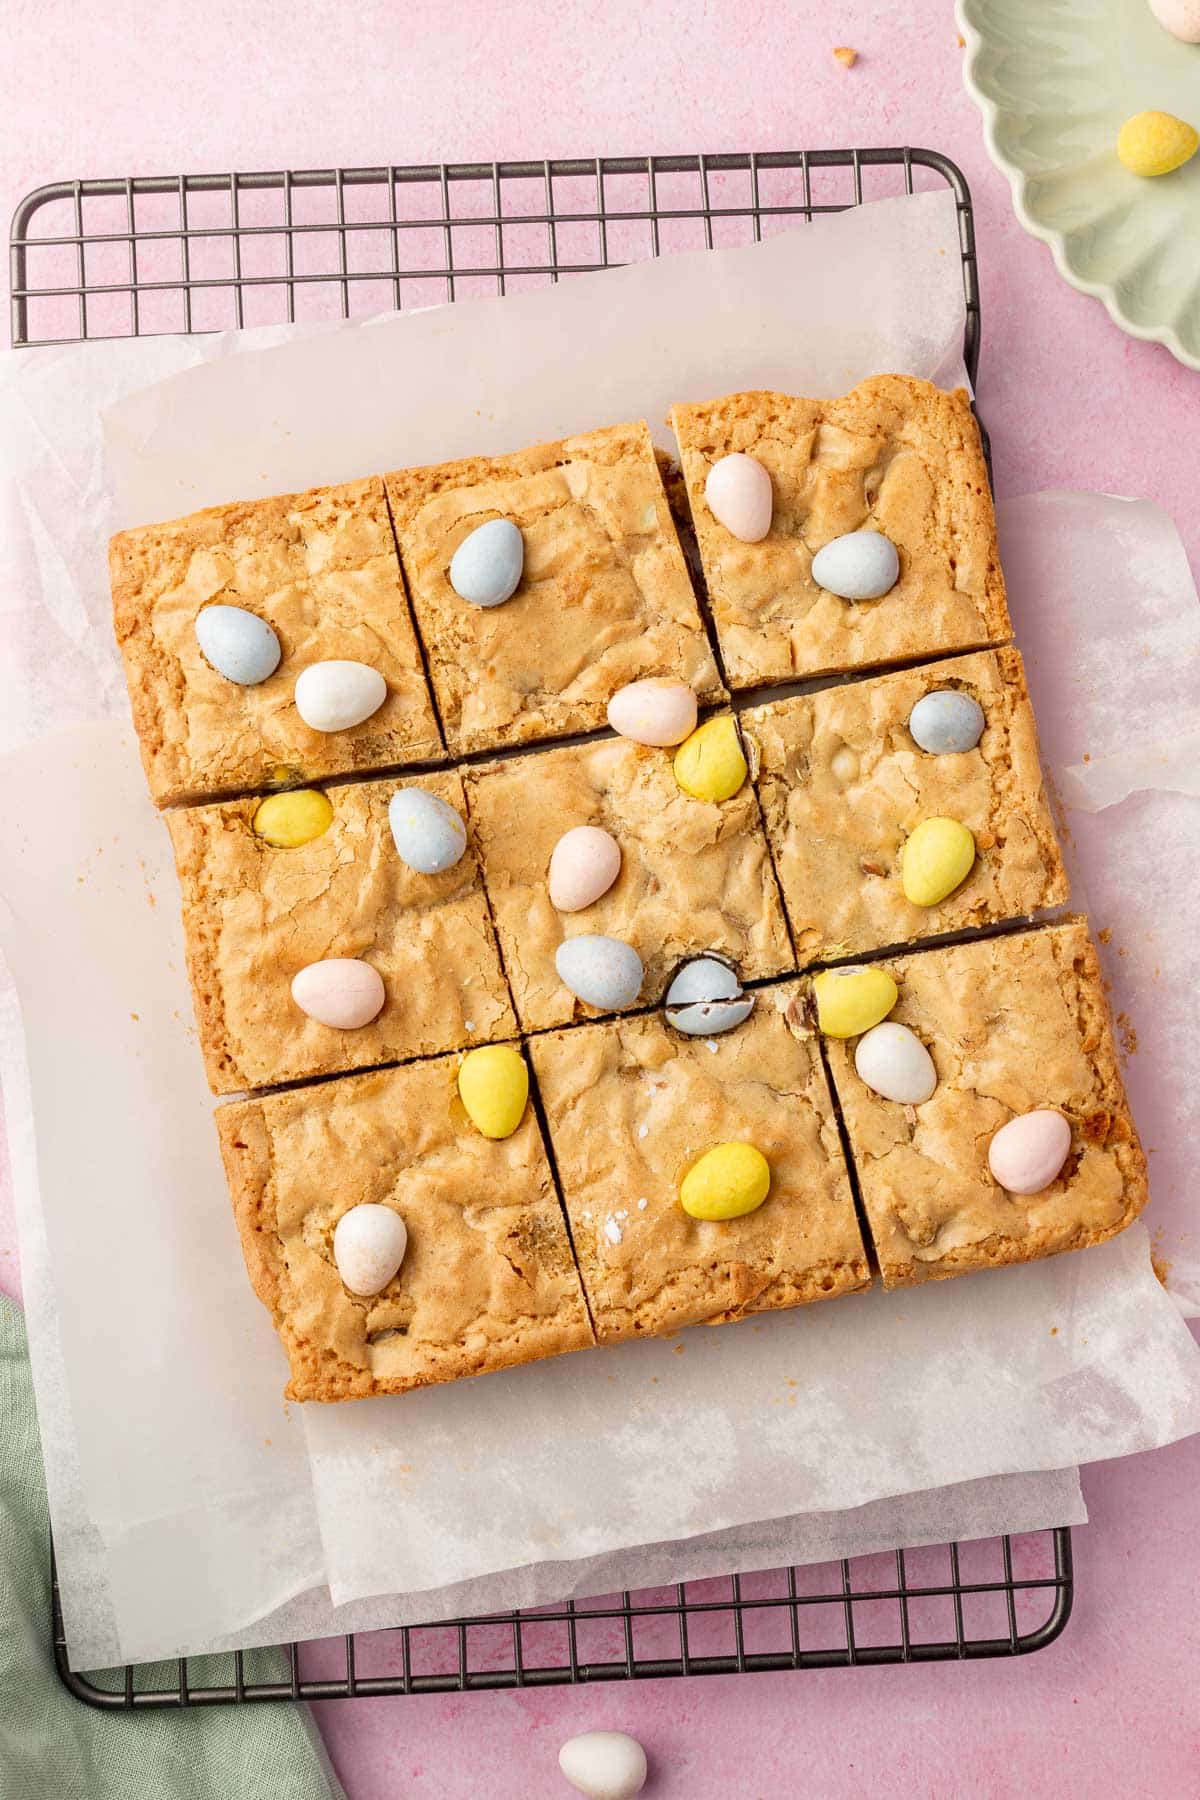 A slab of gluten-free mini egg brownies cut into 9 equal pieces on a parchment lined cooling rack.